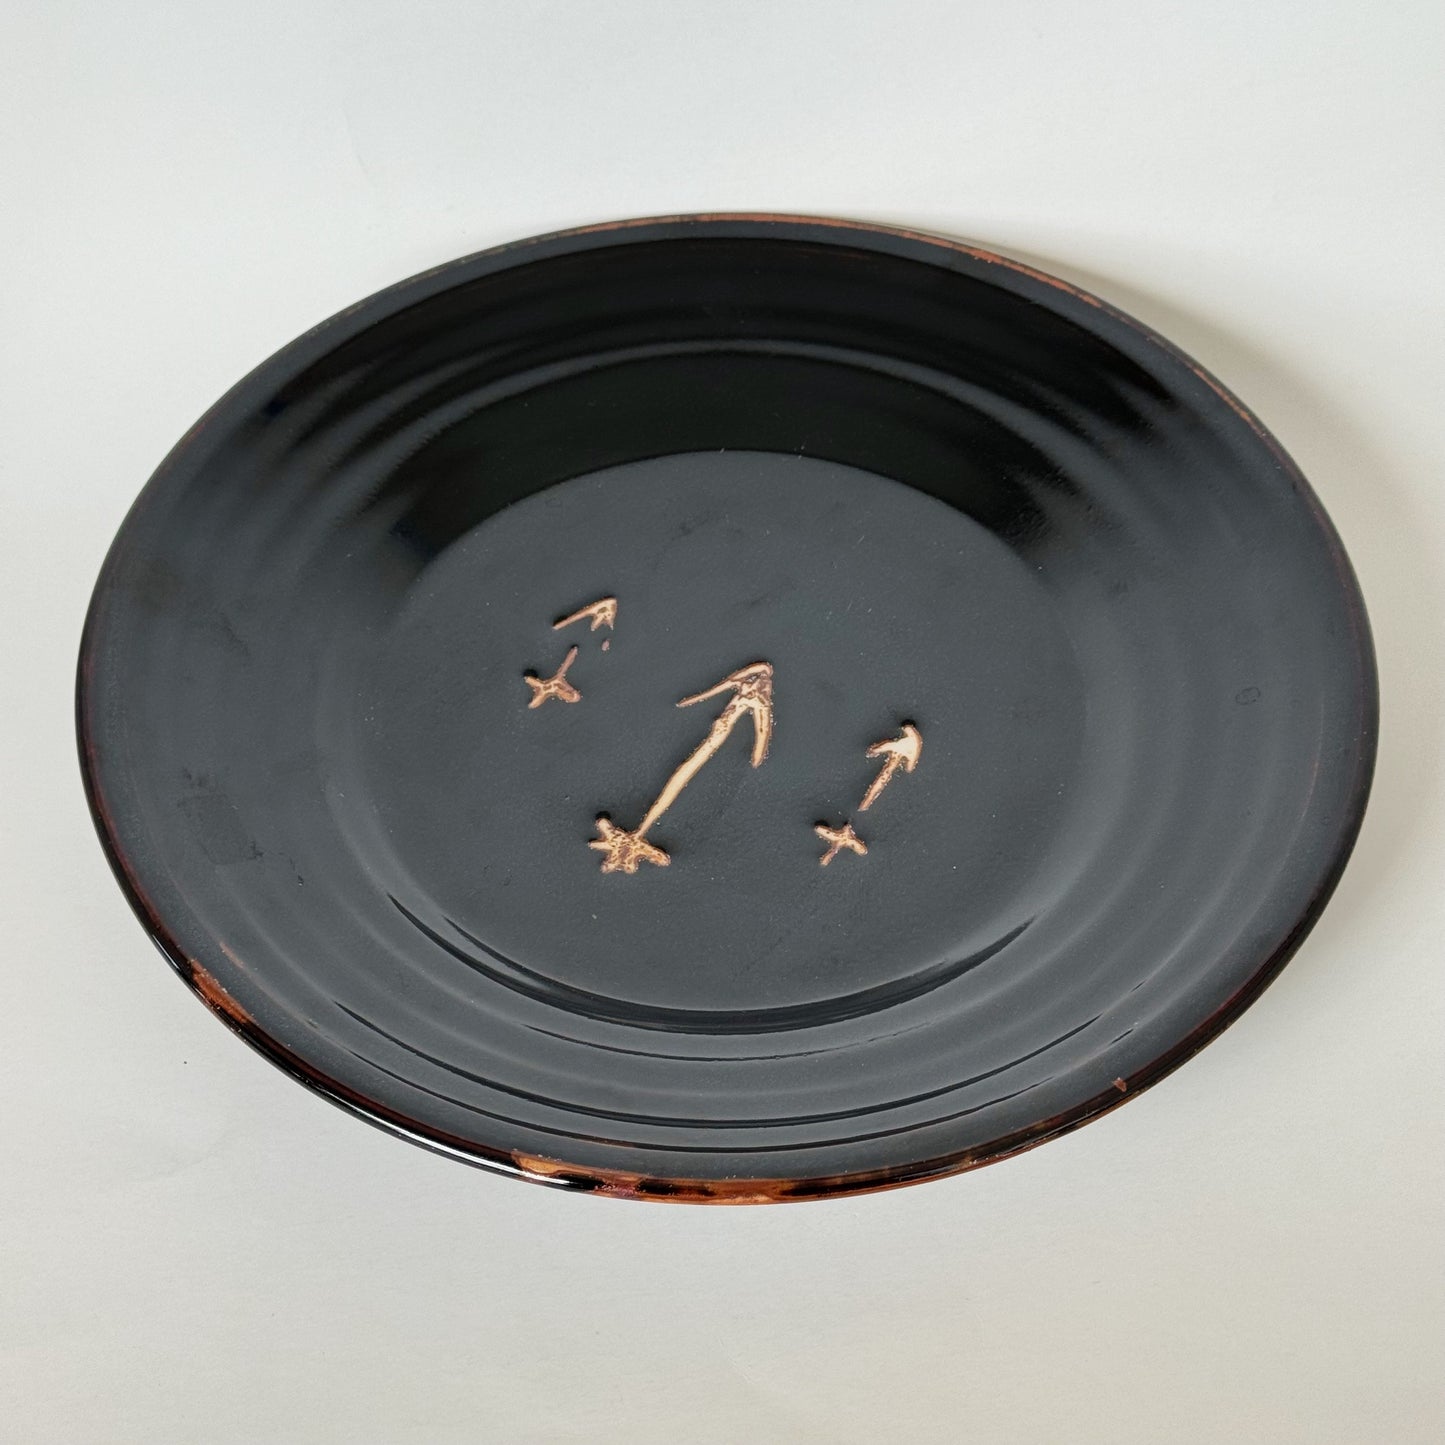 Black Plate with Arrows | Panther Pots Ayden Krzmarzick